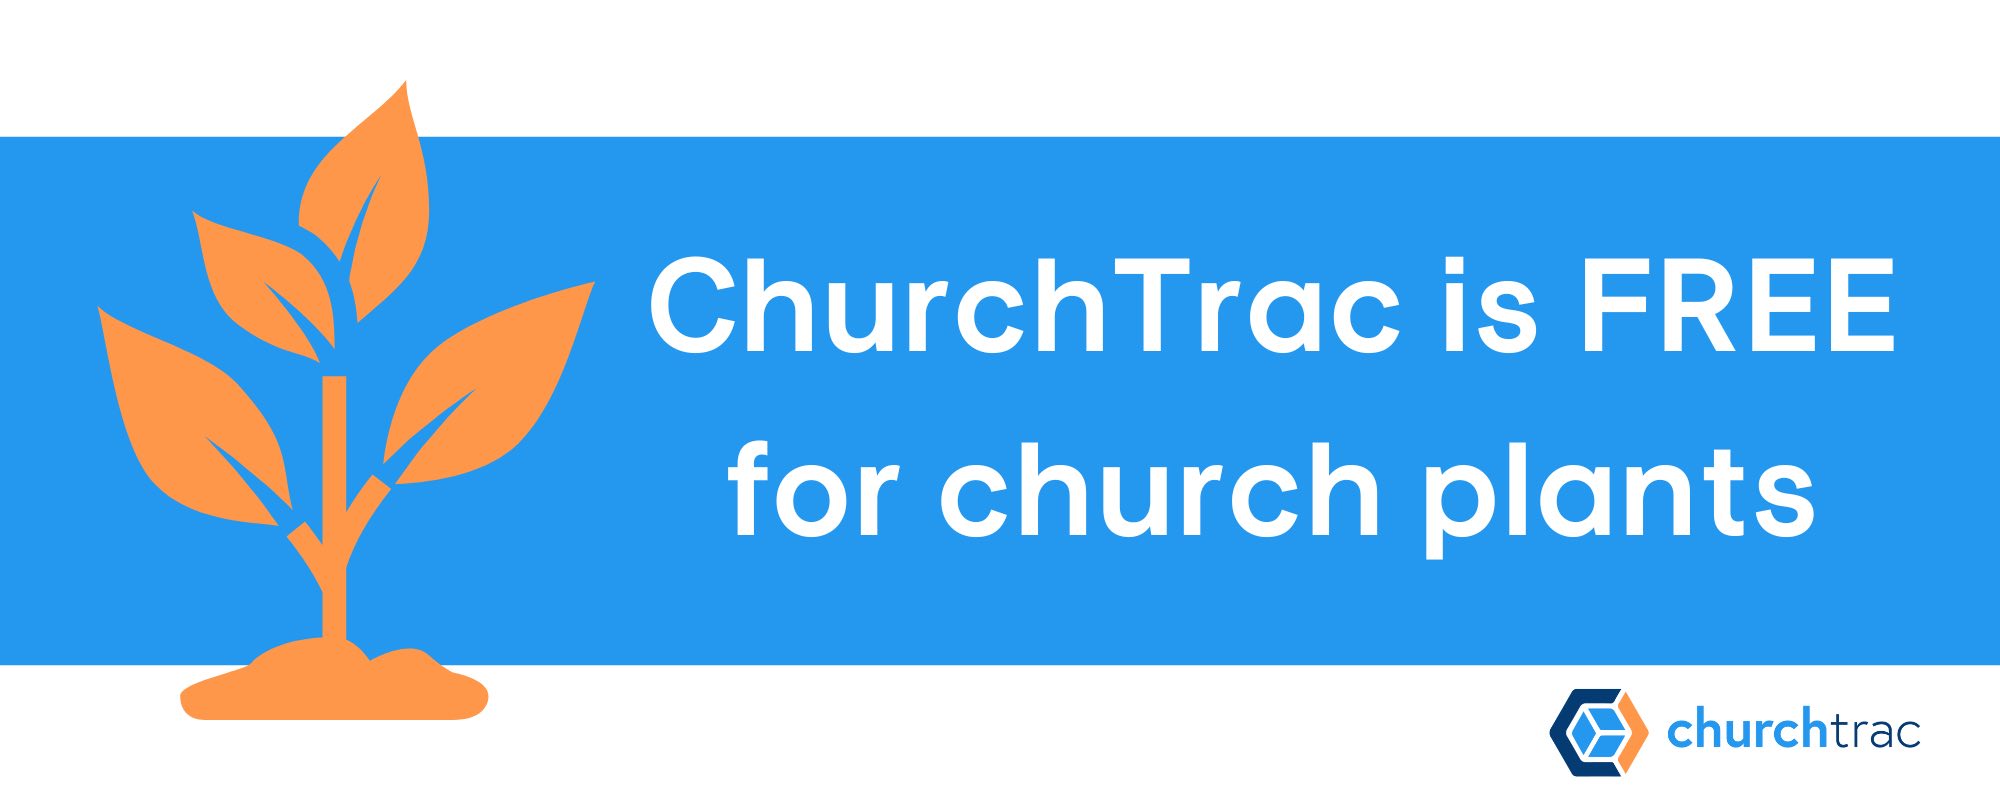 ChurchTrac church planting software is FREE for church planters